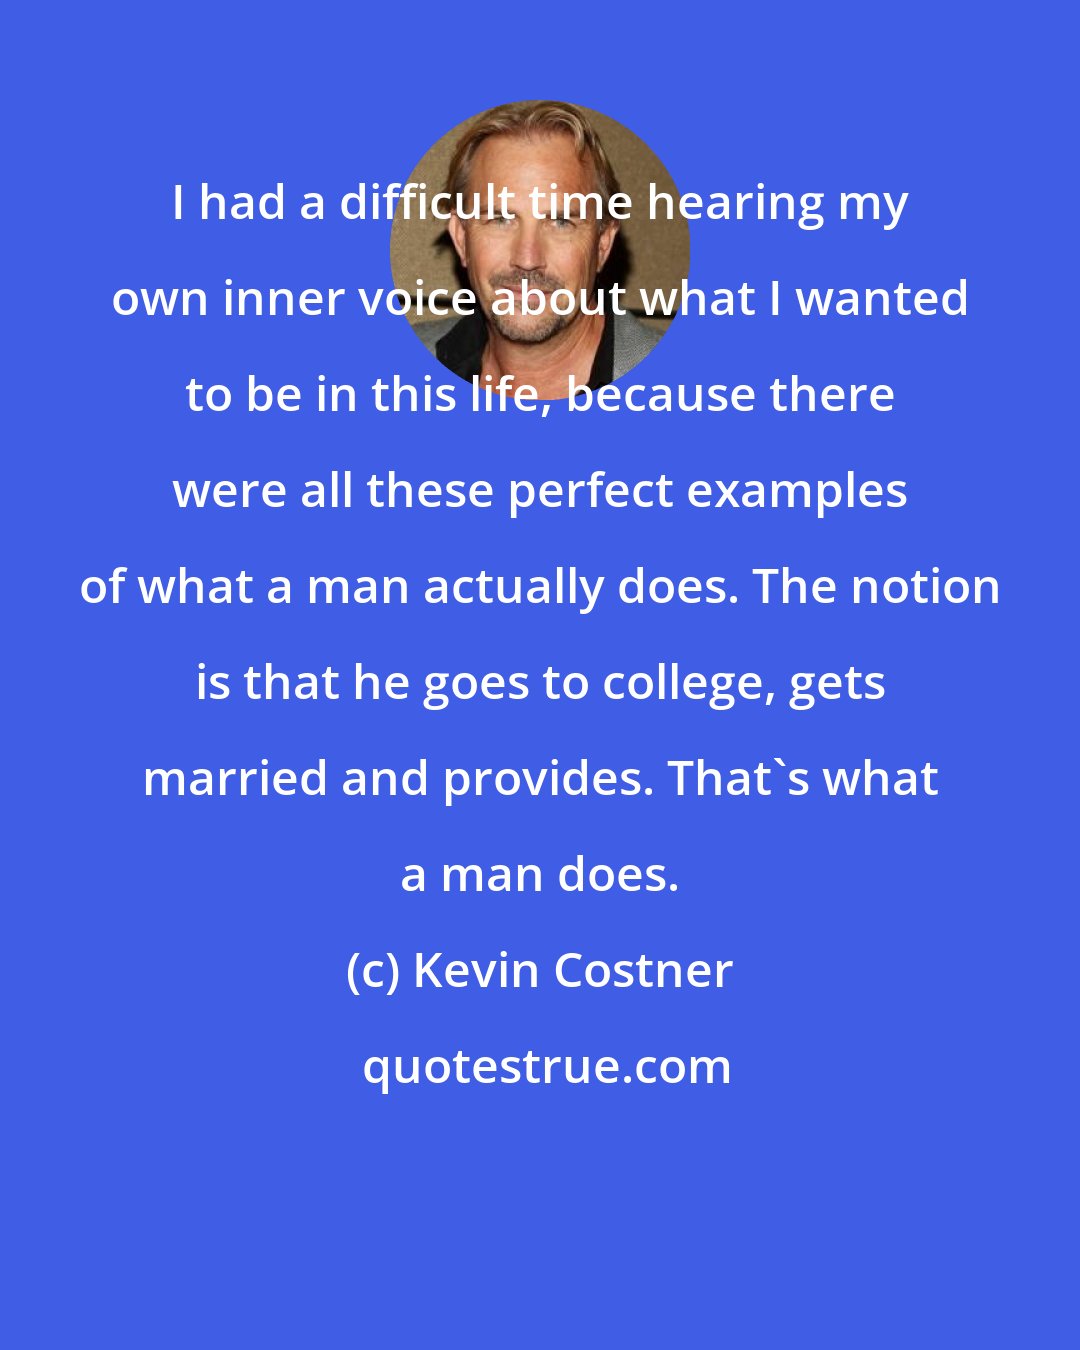 Kevin Costner: I had a difficult time hearing my own inner voice about what I wanted to be in this life, because there were all these perfect examples of what a man actually does. The notion is that he goes to college, gets married and provides. That's what a man does.